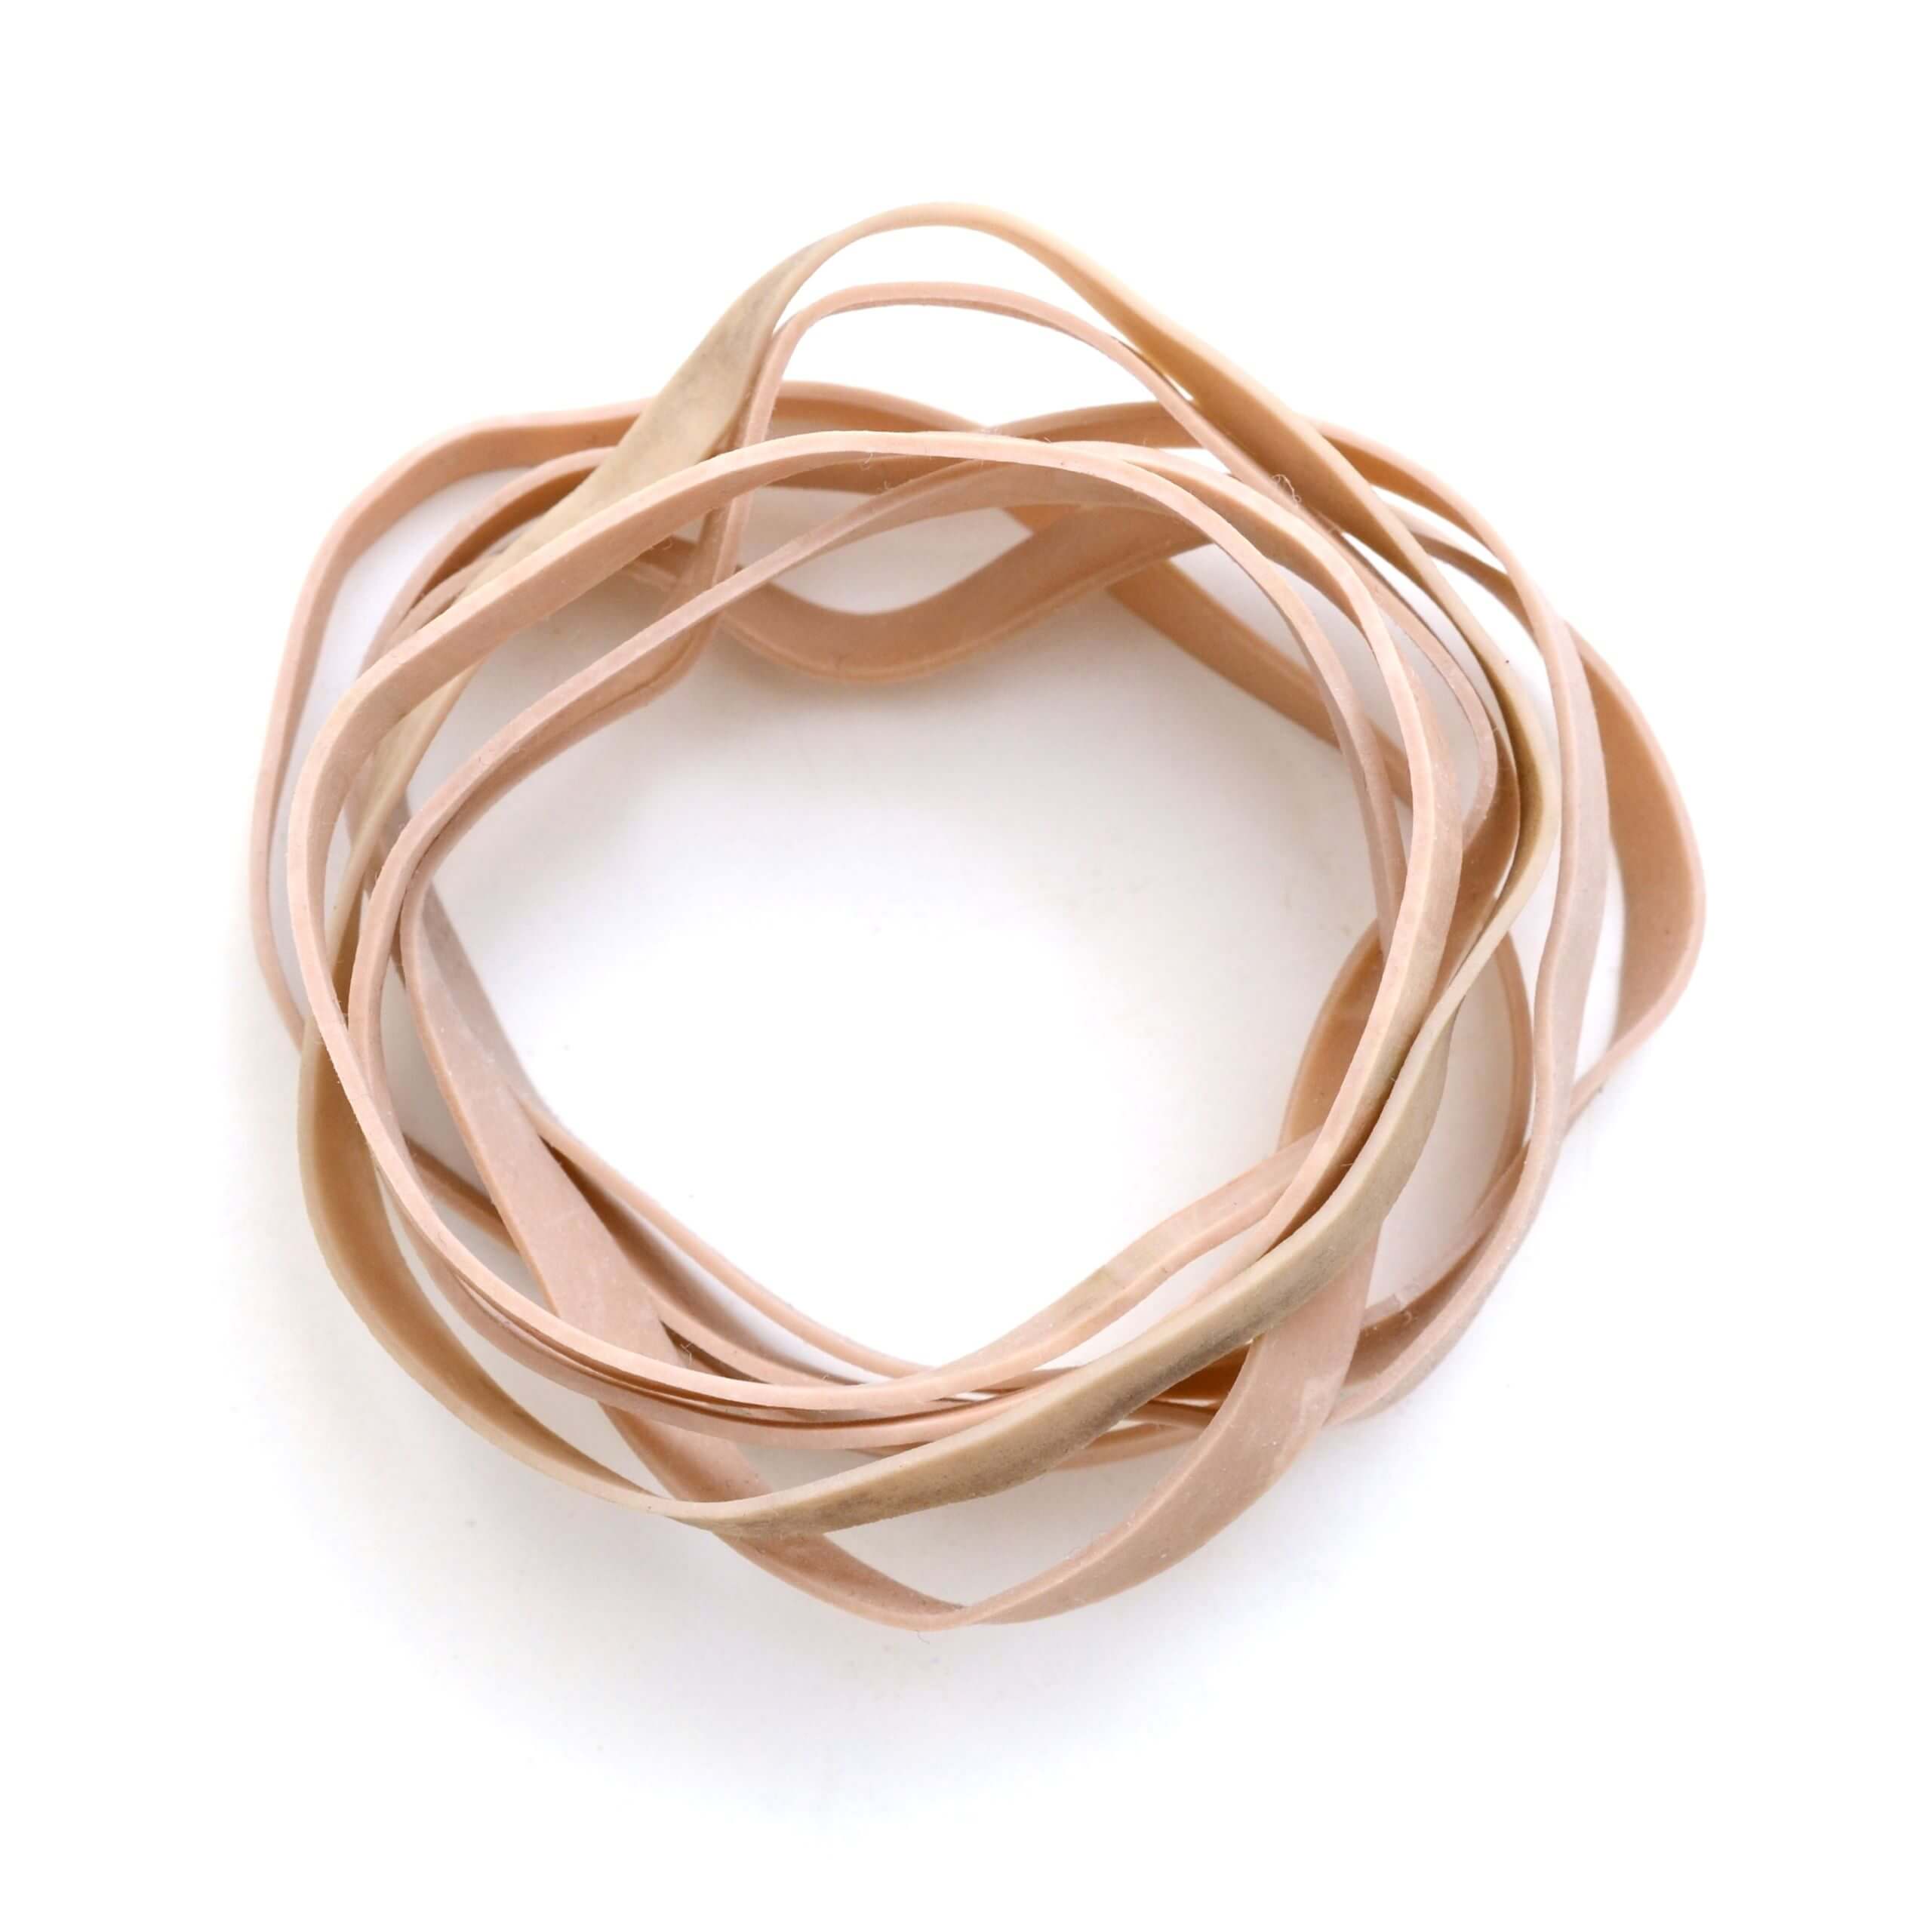 An image of Rubber Bands.